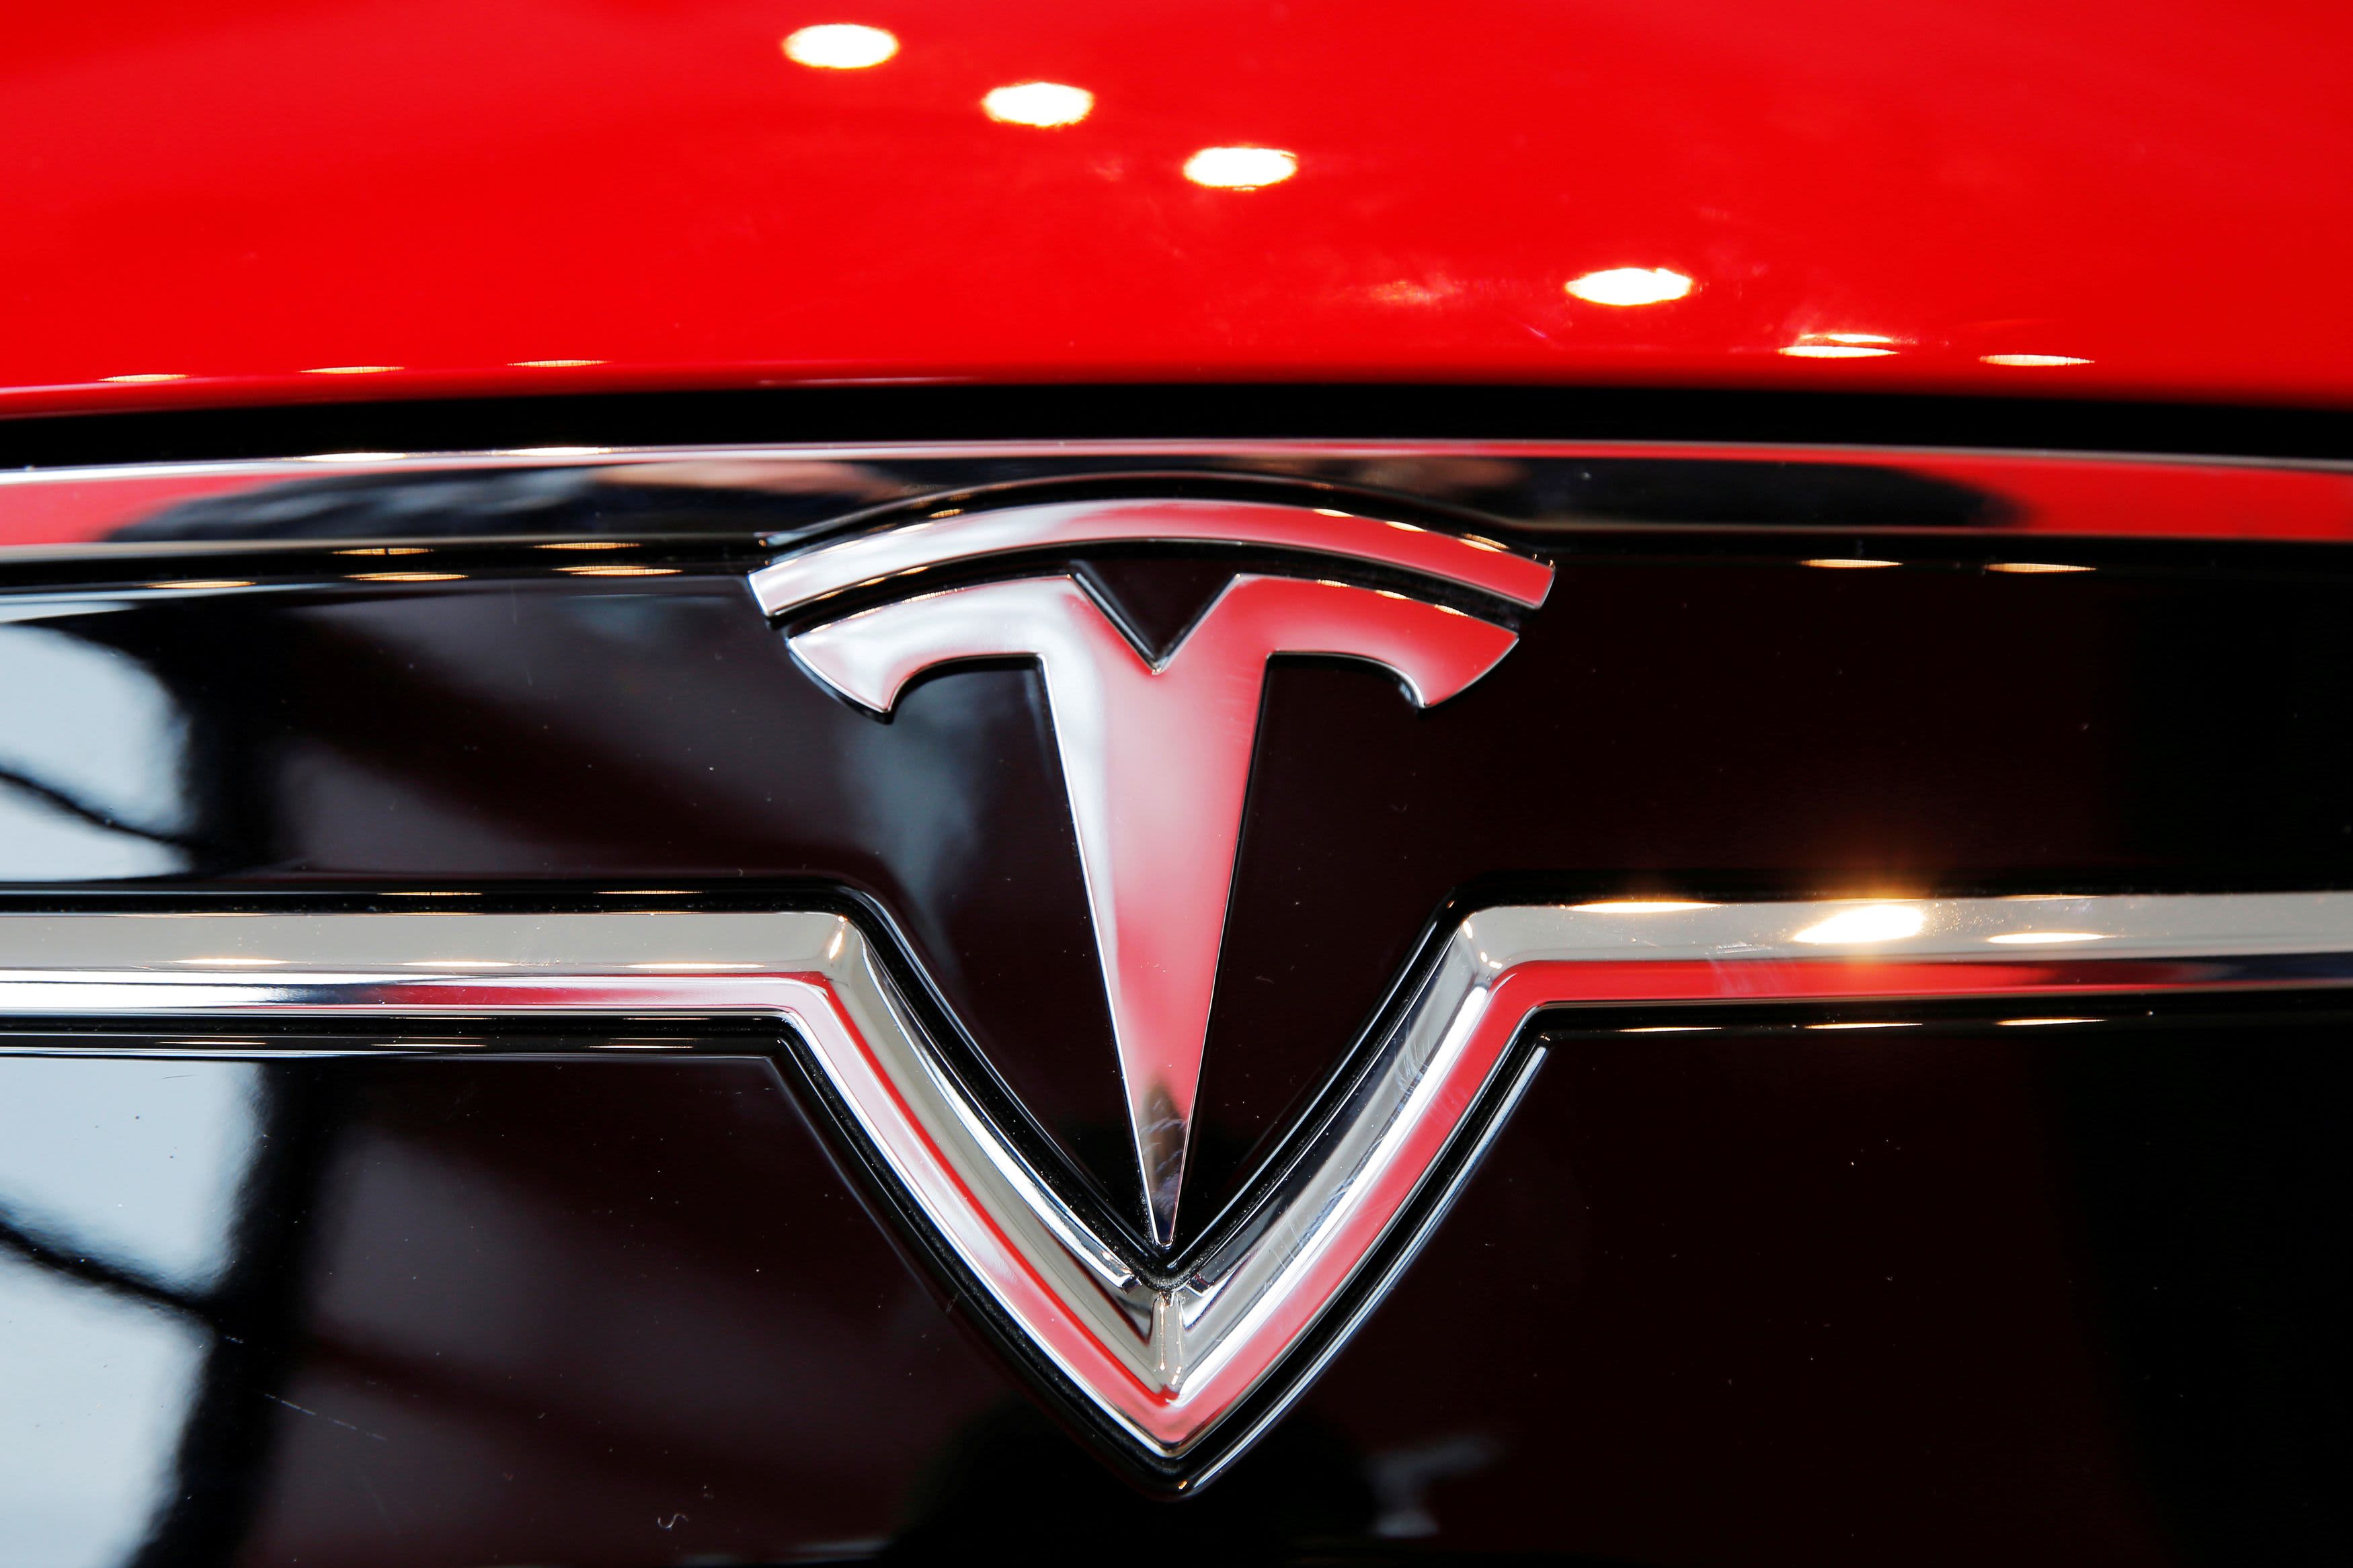 The autopilot is not used in the Texas Tesla crash